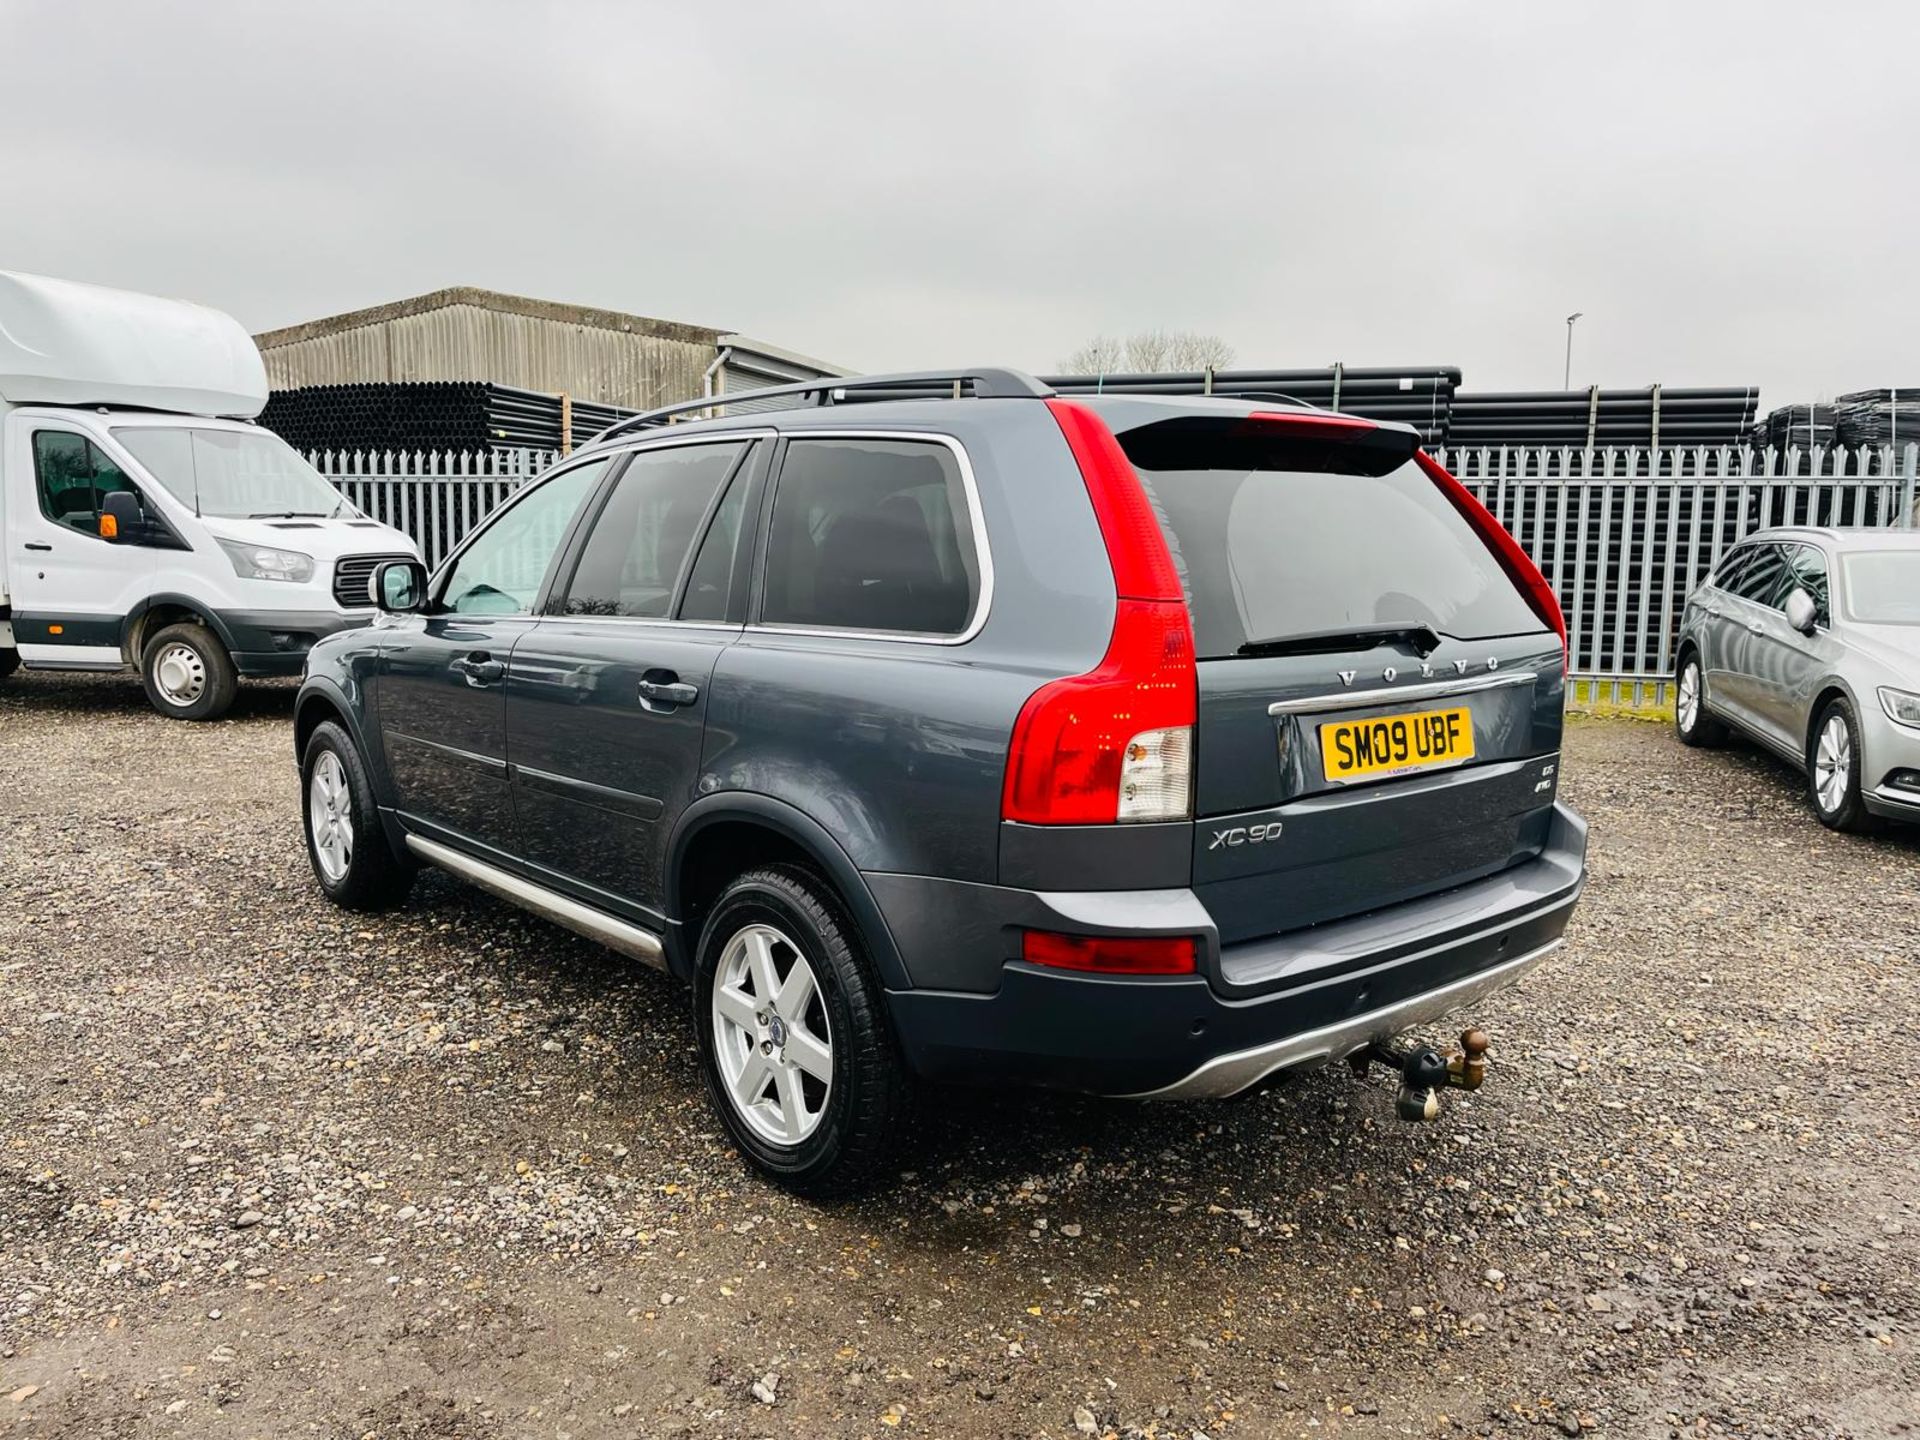 ** ON SALE ** Volvo Xc90 Active Automatic D5 185 Geartronic -Air Conditioning -Bluetooth Handsfree - Image 5 of 36